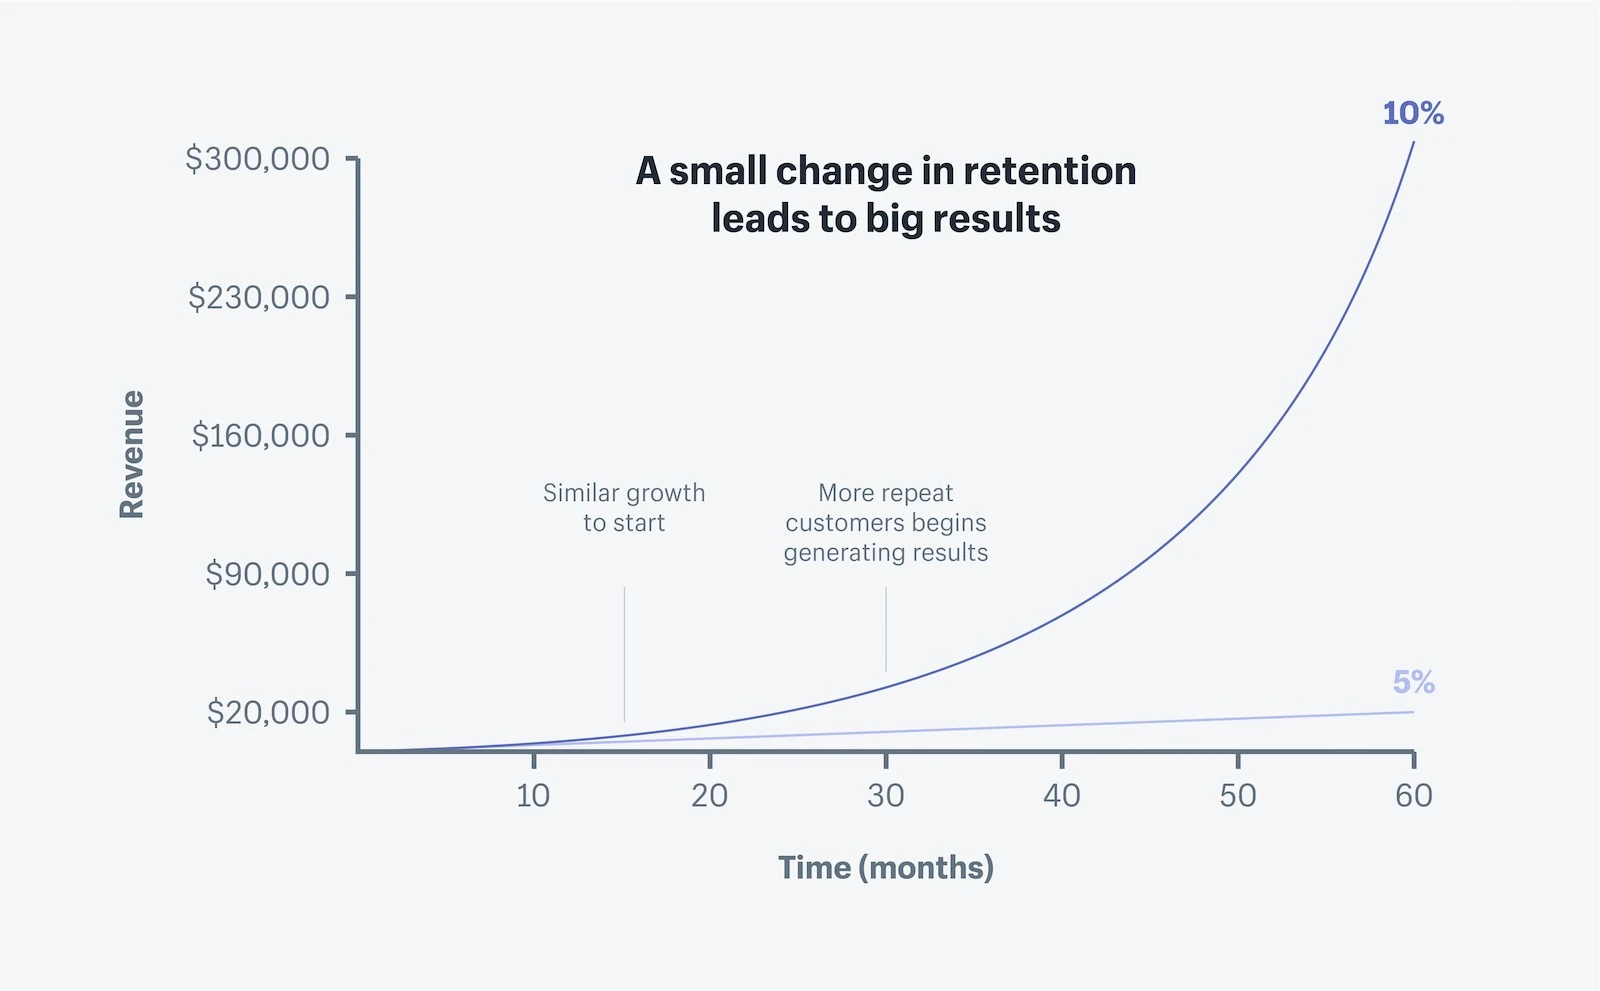 Graph shows how a small change in retention leads to more revenue.